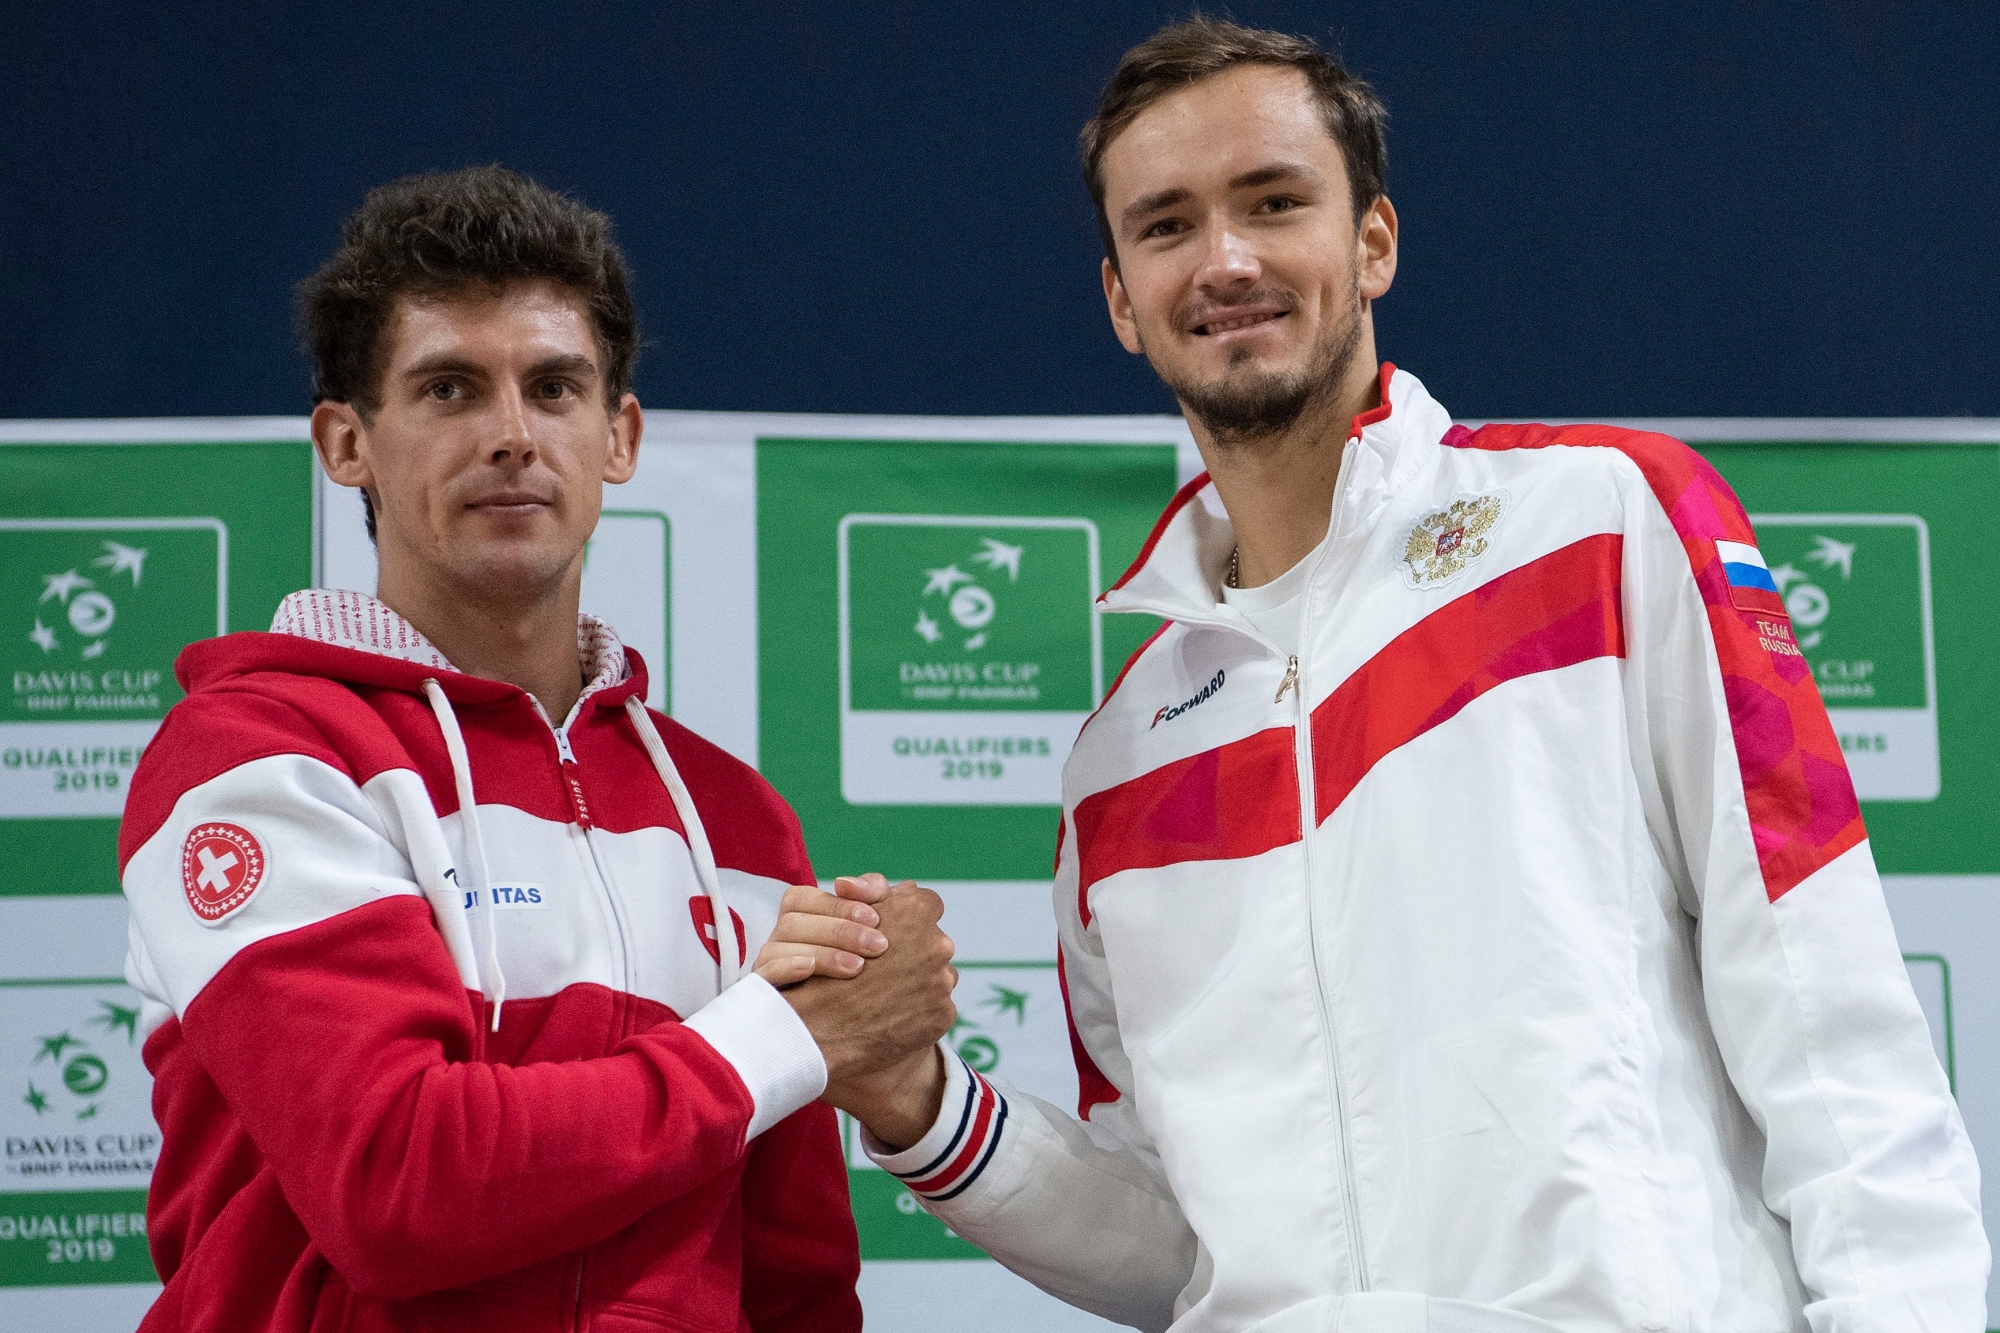 Switzerland's Davis Cup player Henri Laaksonen, left, and Russia's Davis Cup player Daniil Medvedev, right, pose during the draw ceremony in the Swiss Tennis Arena in Biel, Switzerland, on Thursday, January 31, 2019. Switzerland will be face Russia in the tennis Davis Cup qualification final round. (KEYSTONE/Peter Schneider) SWITZERLAND TENNIS DAVIS CUP